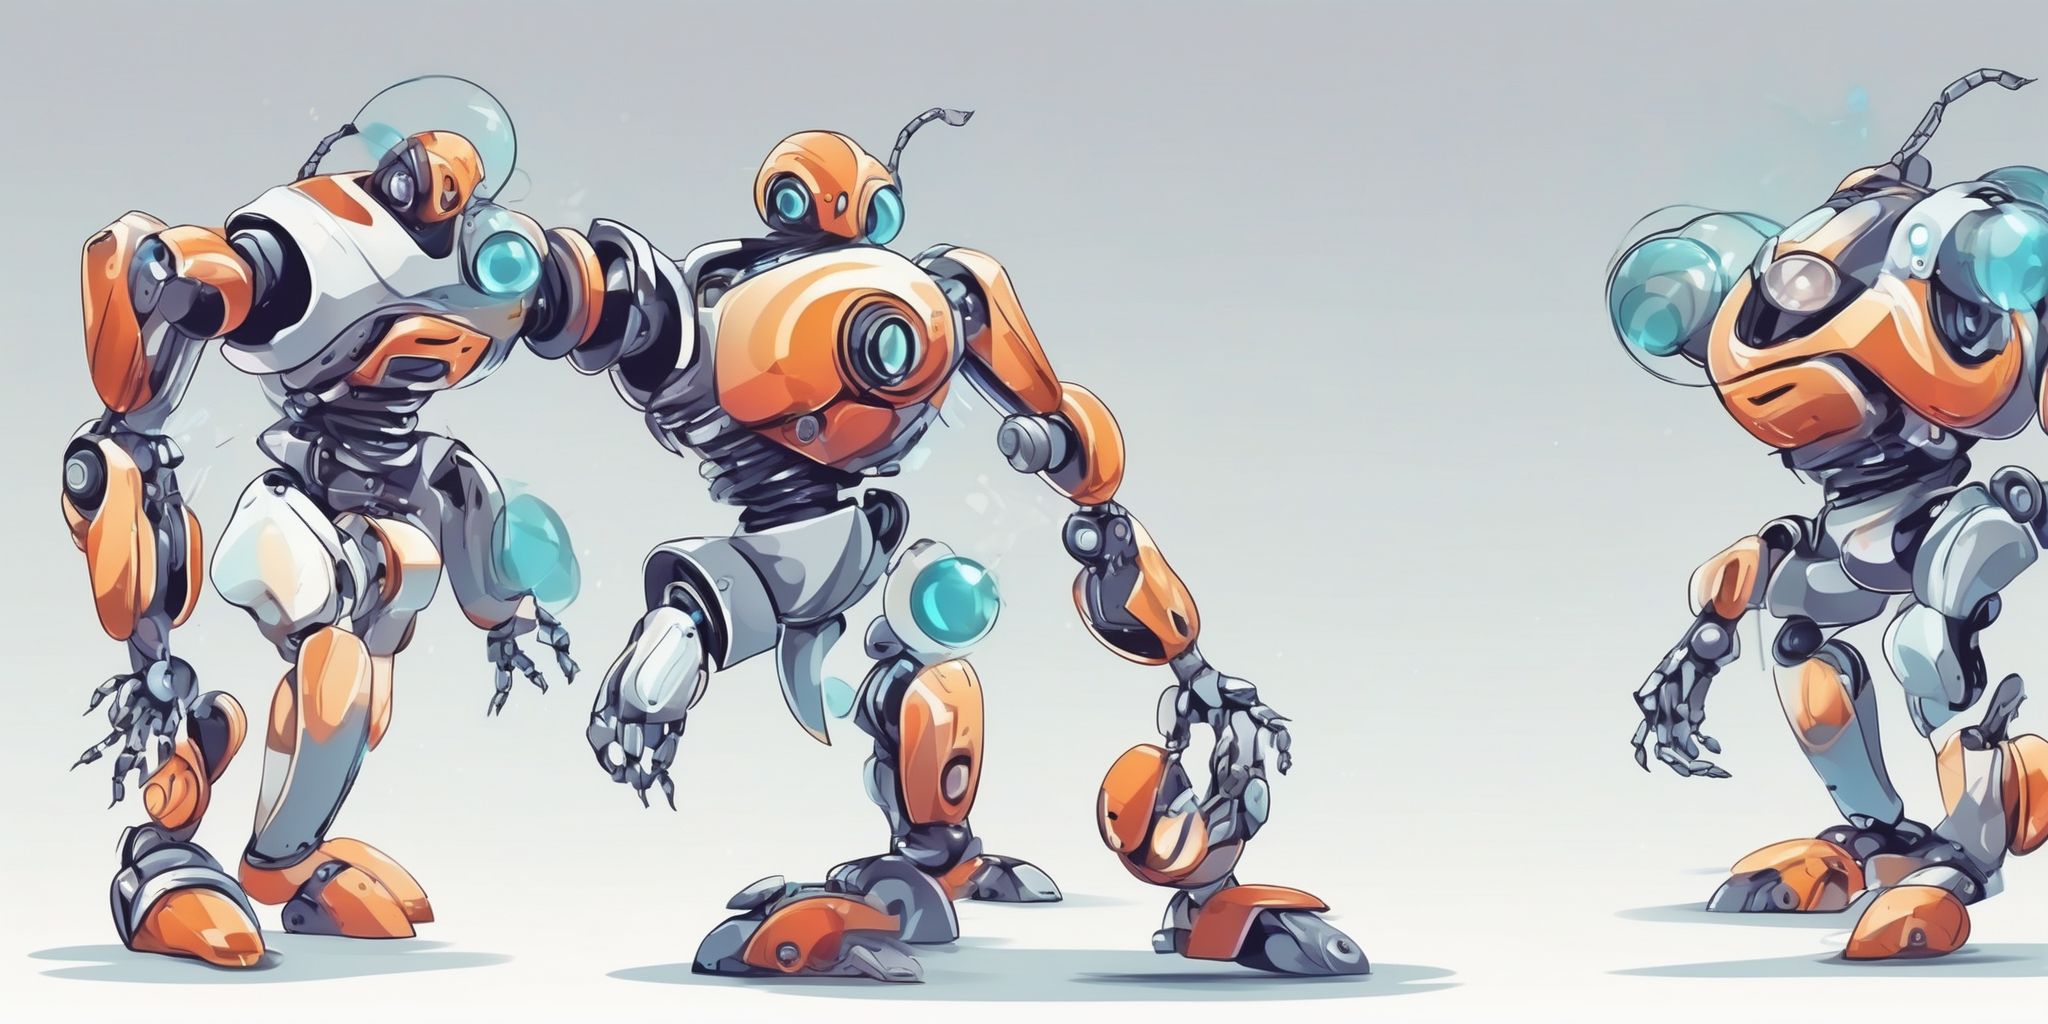 robot in illustration style with gradients and white background